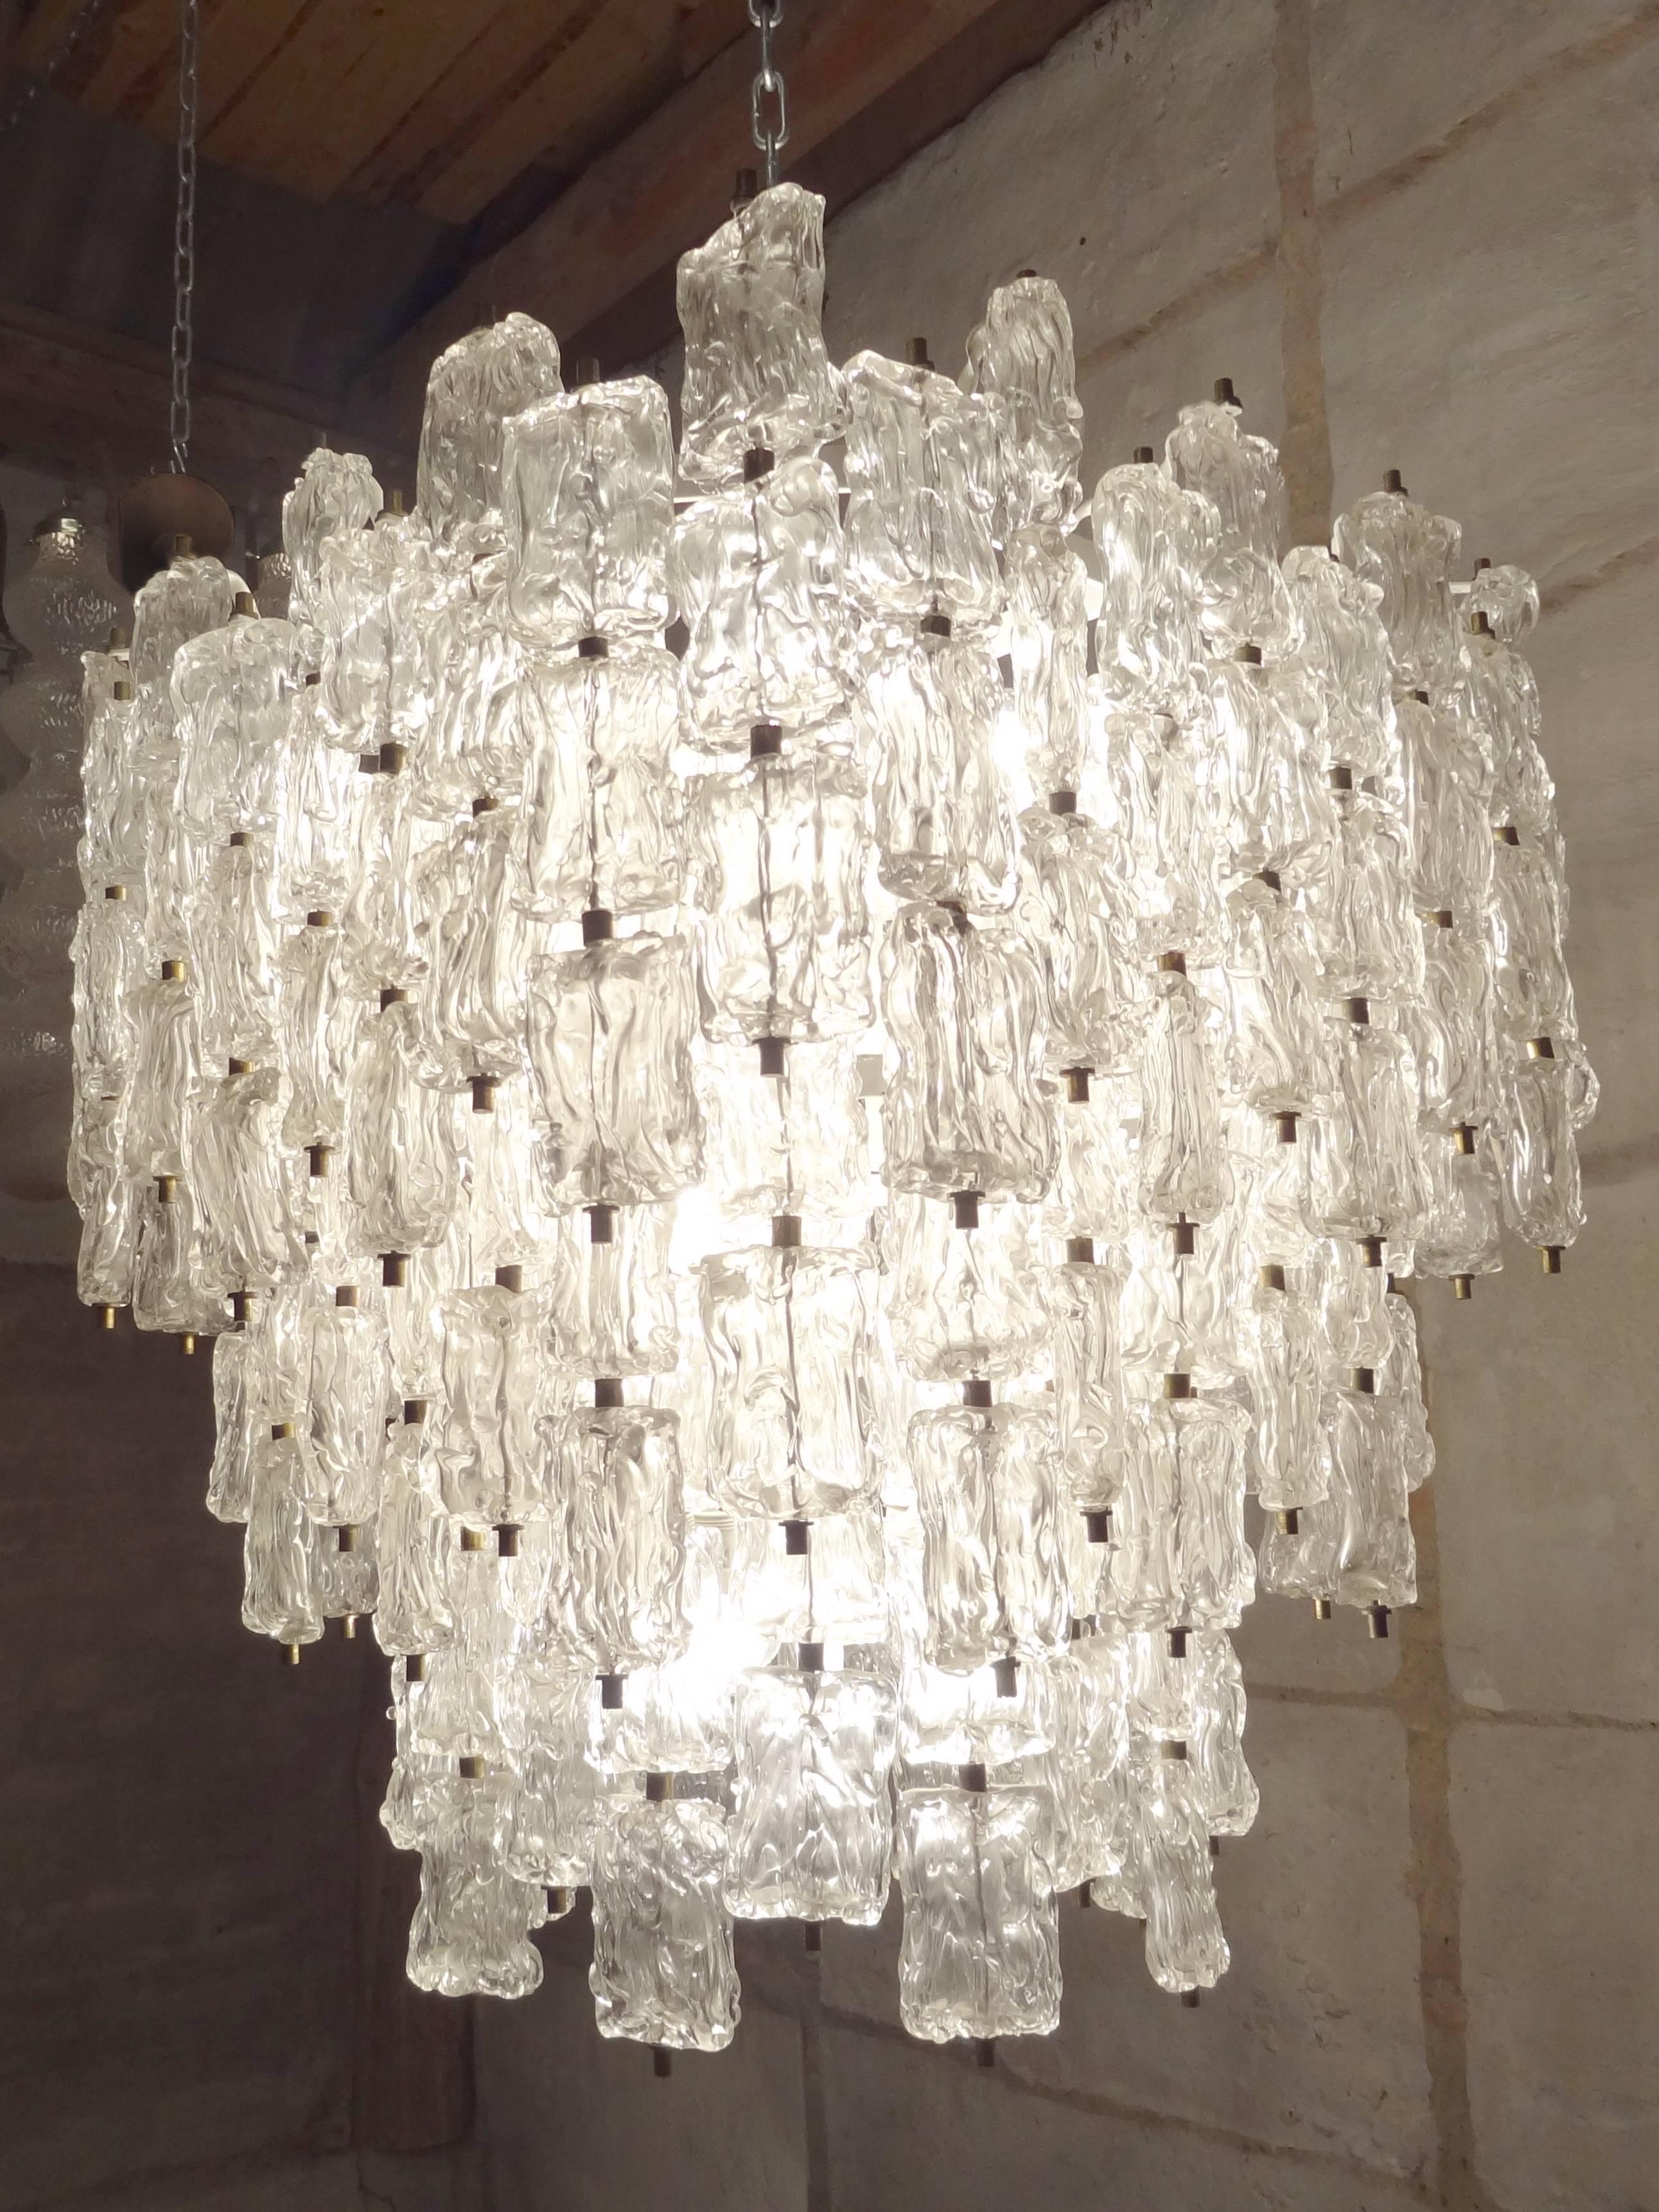 A large chandelier consisting of multiple pieces of textured glass hung from a brass frame by Aureliano Toso.

Italian, Circa 1962